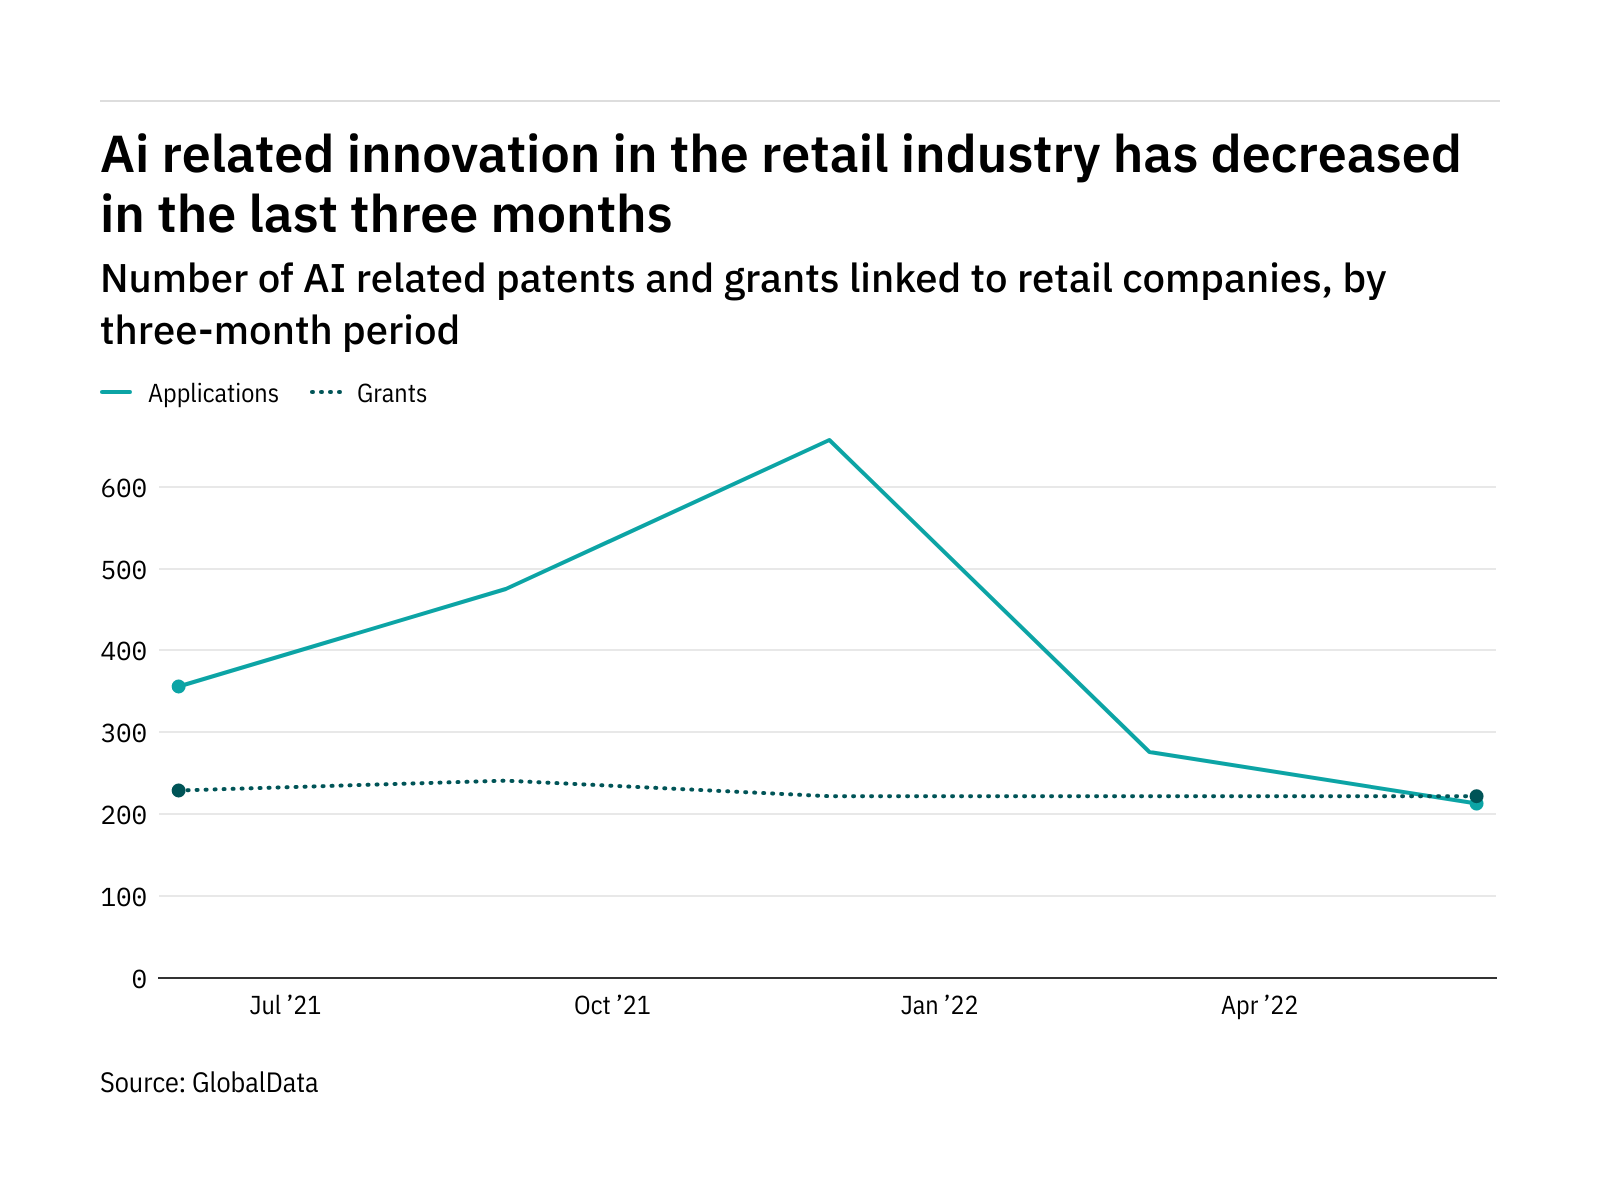 Artificial intelligence innovation among retail industry companies has dropped off in the last three months